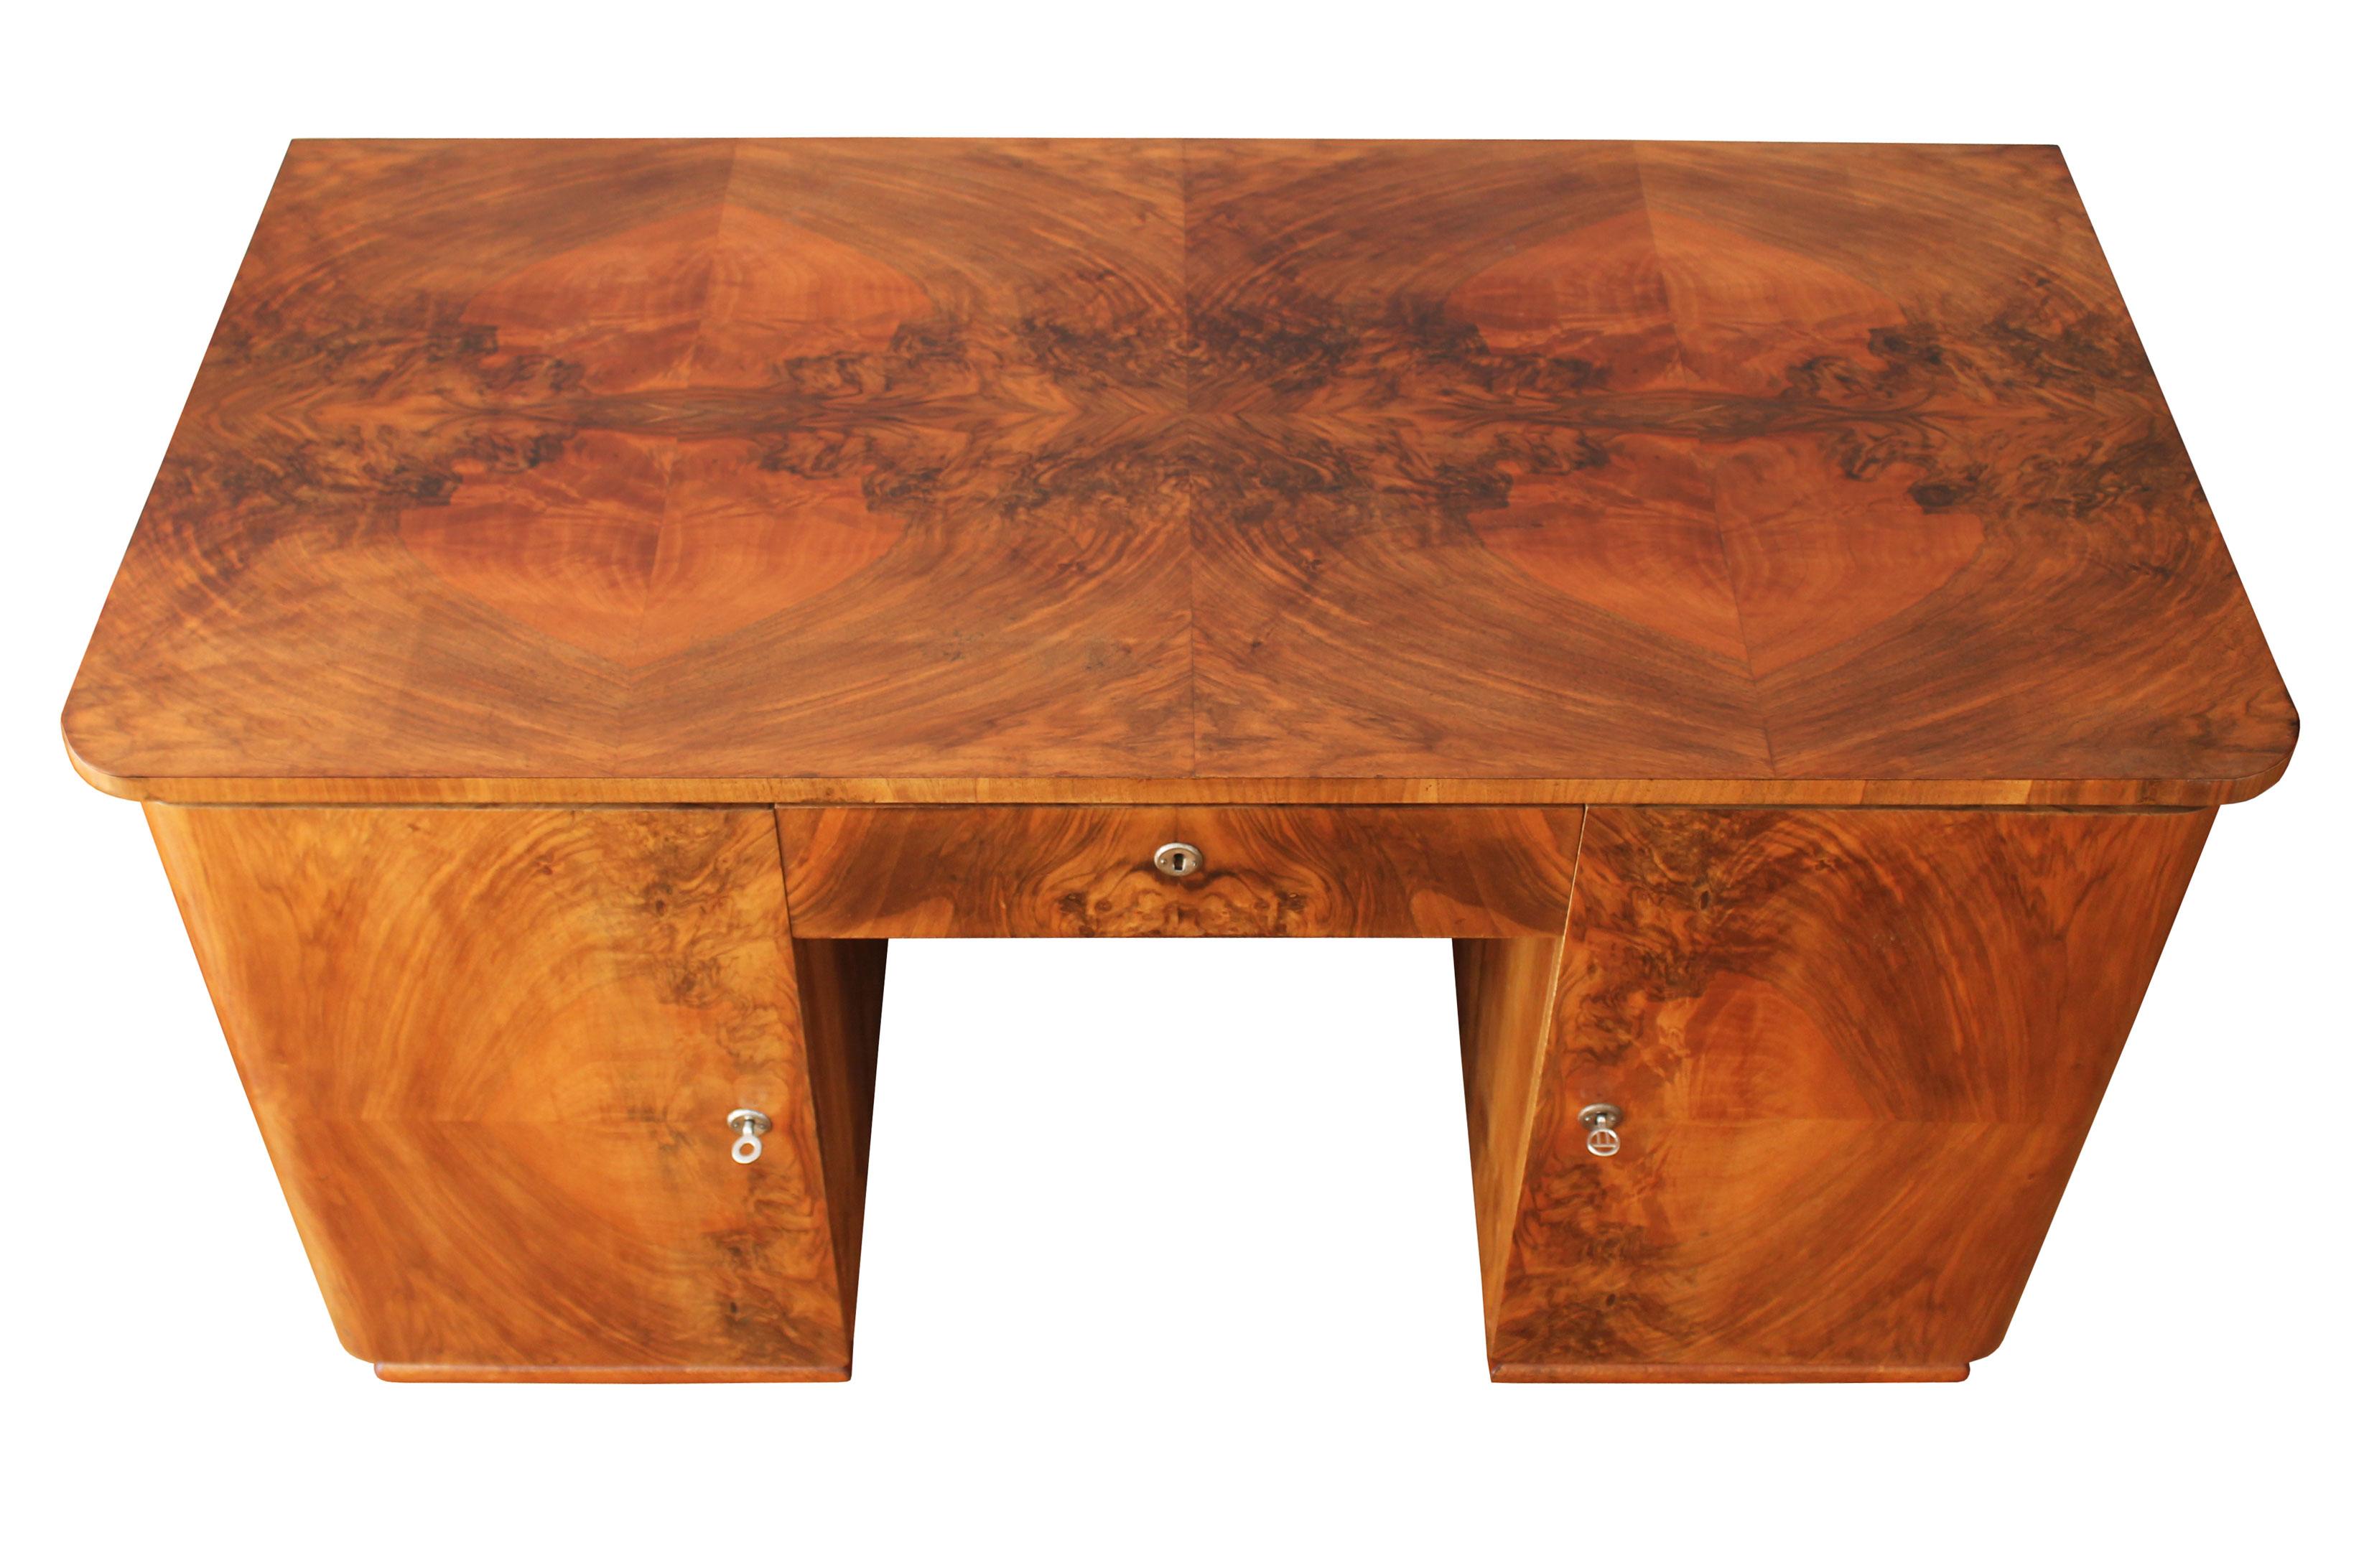 An original Art Deco desk from the 1940s. This piece has a dignified design with robust and stylish proportions and a dazzling Walnut pattern to it’s table top, sides, doors and drawers.

This writing / office desk has a rectangle table top with